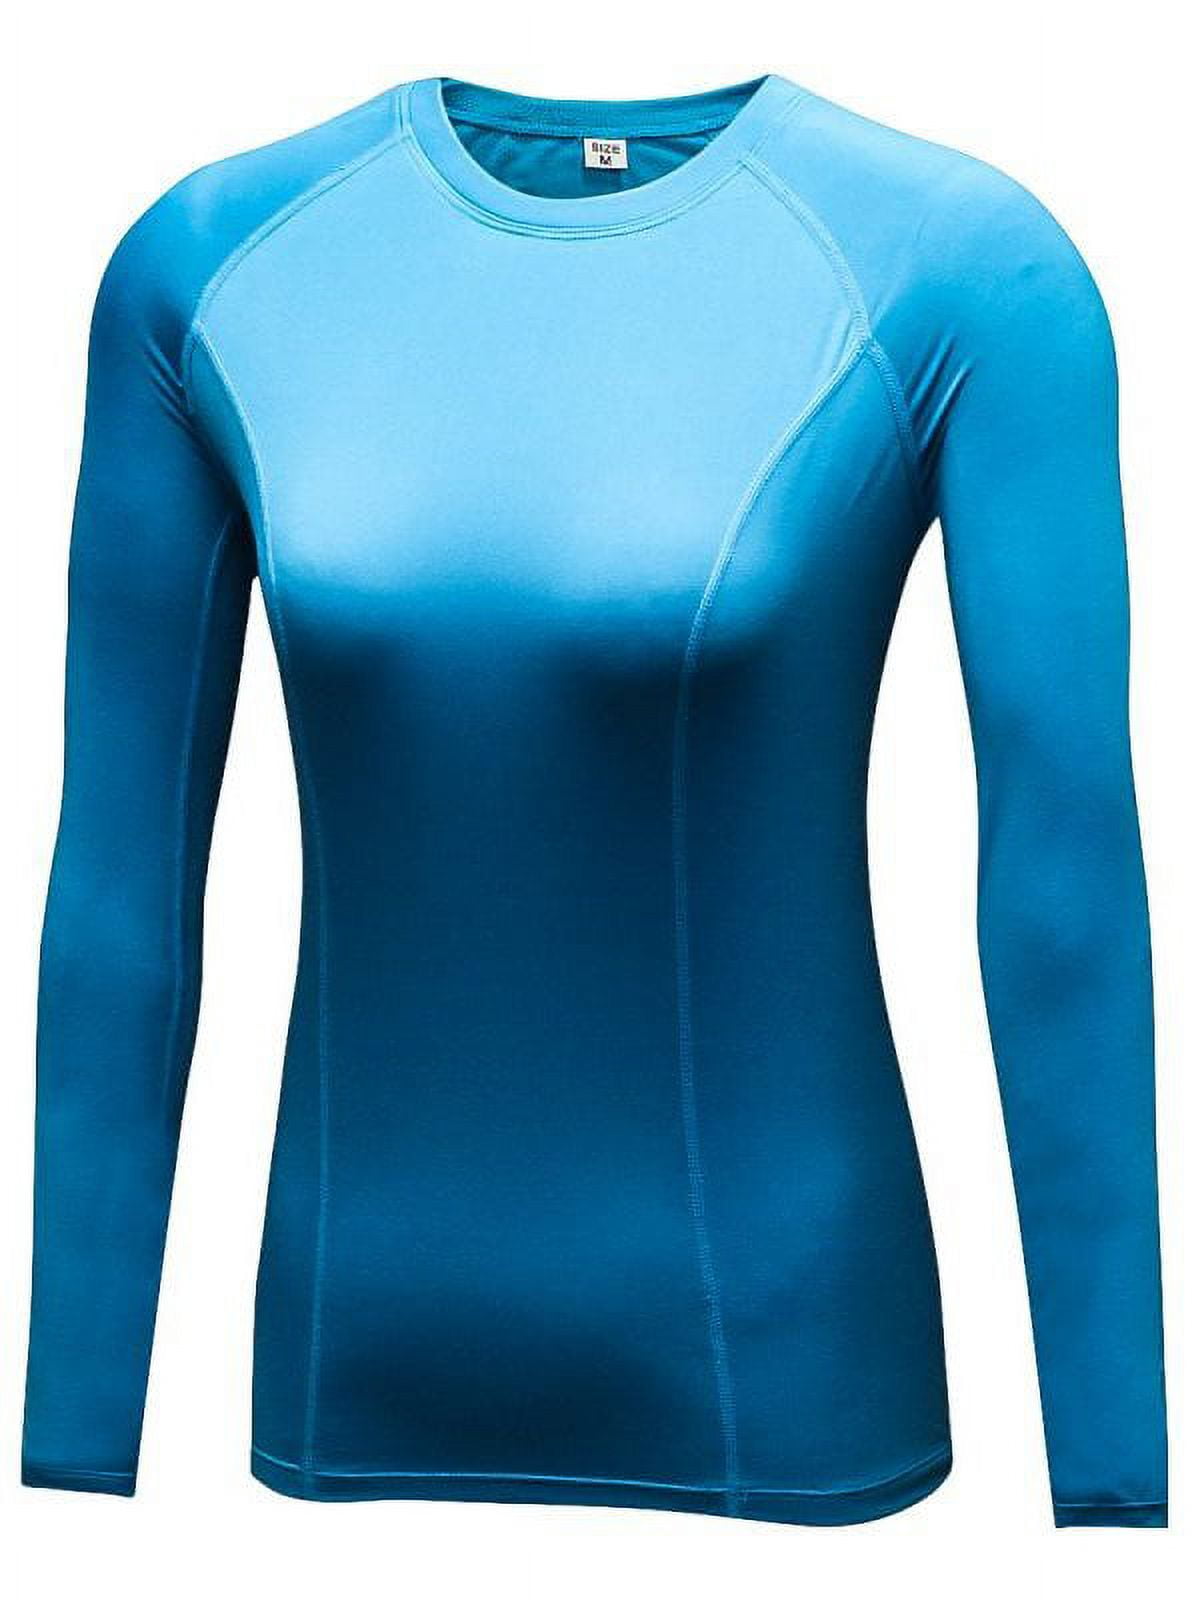 Women's Dry Fit Athletic Thermal Compression Long Sleeve T Shirt